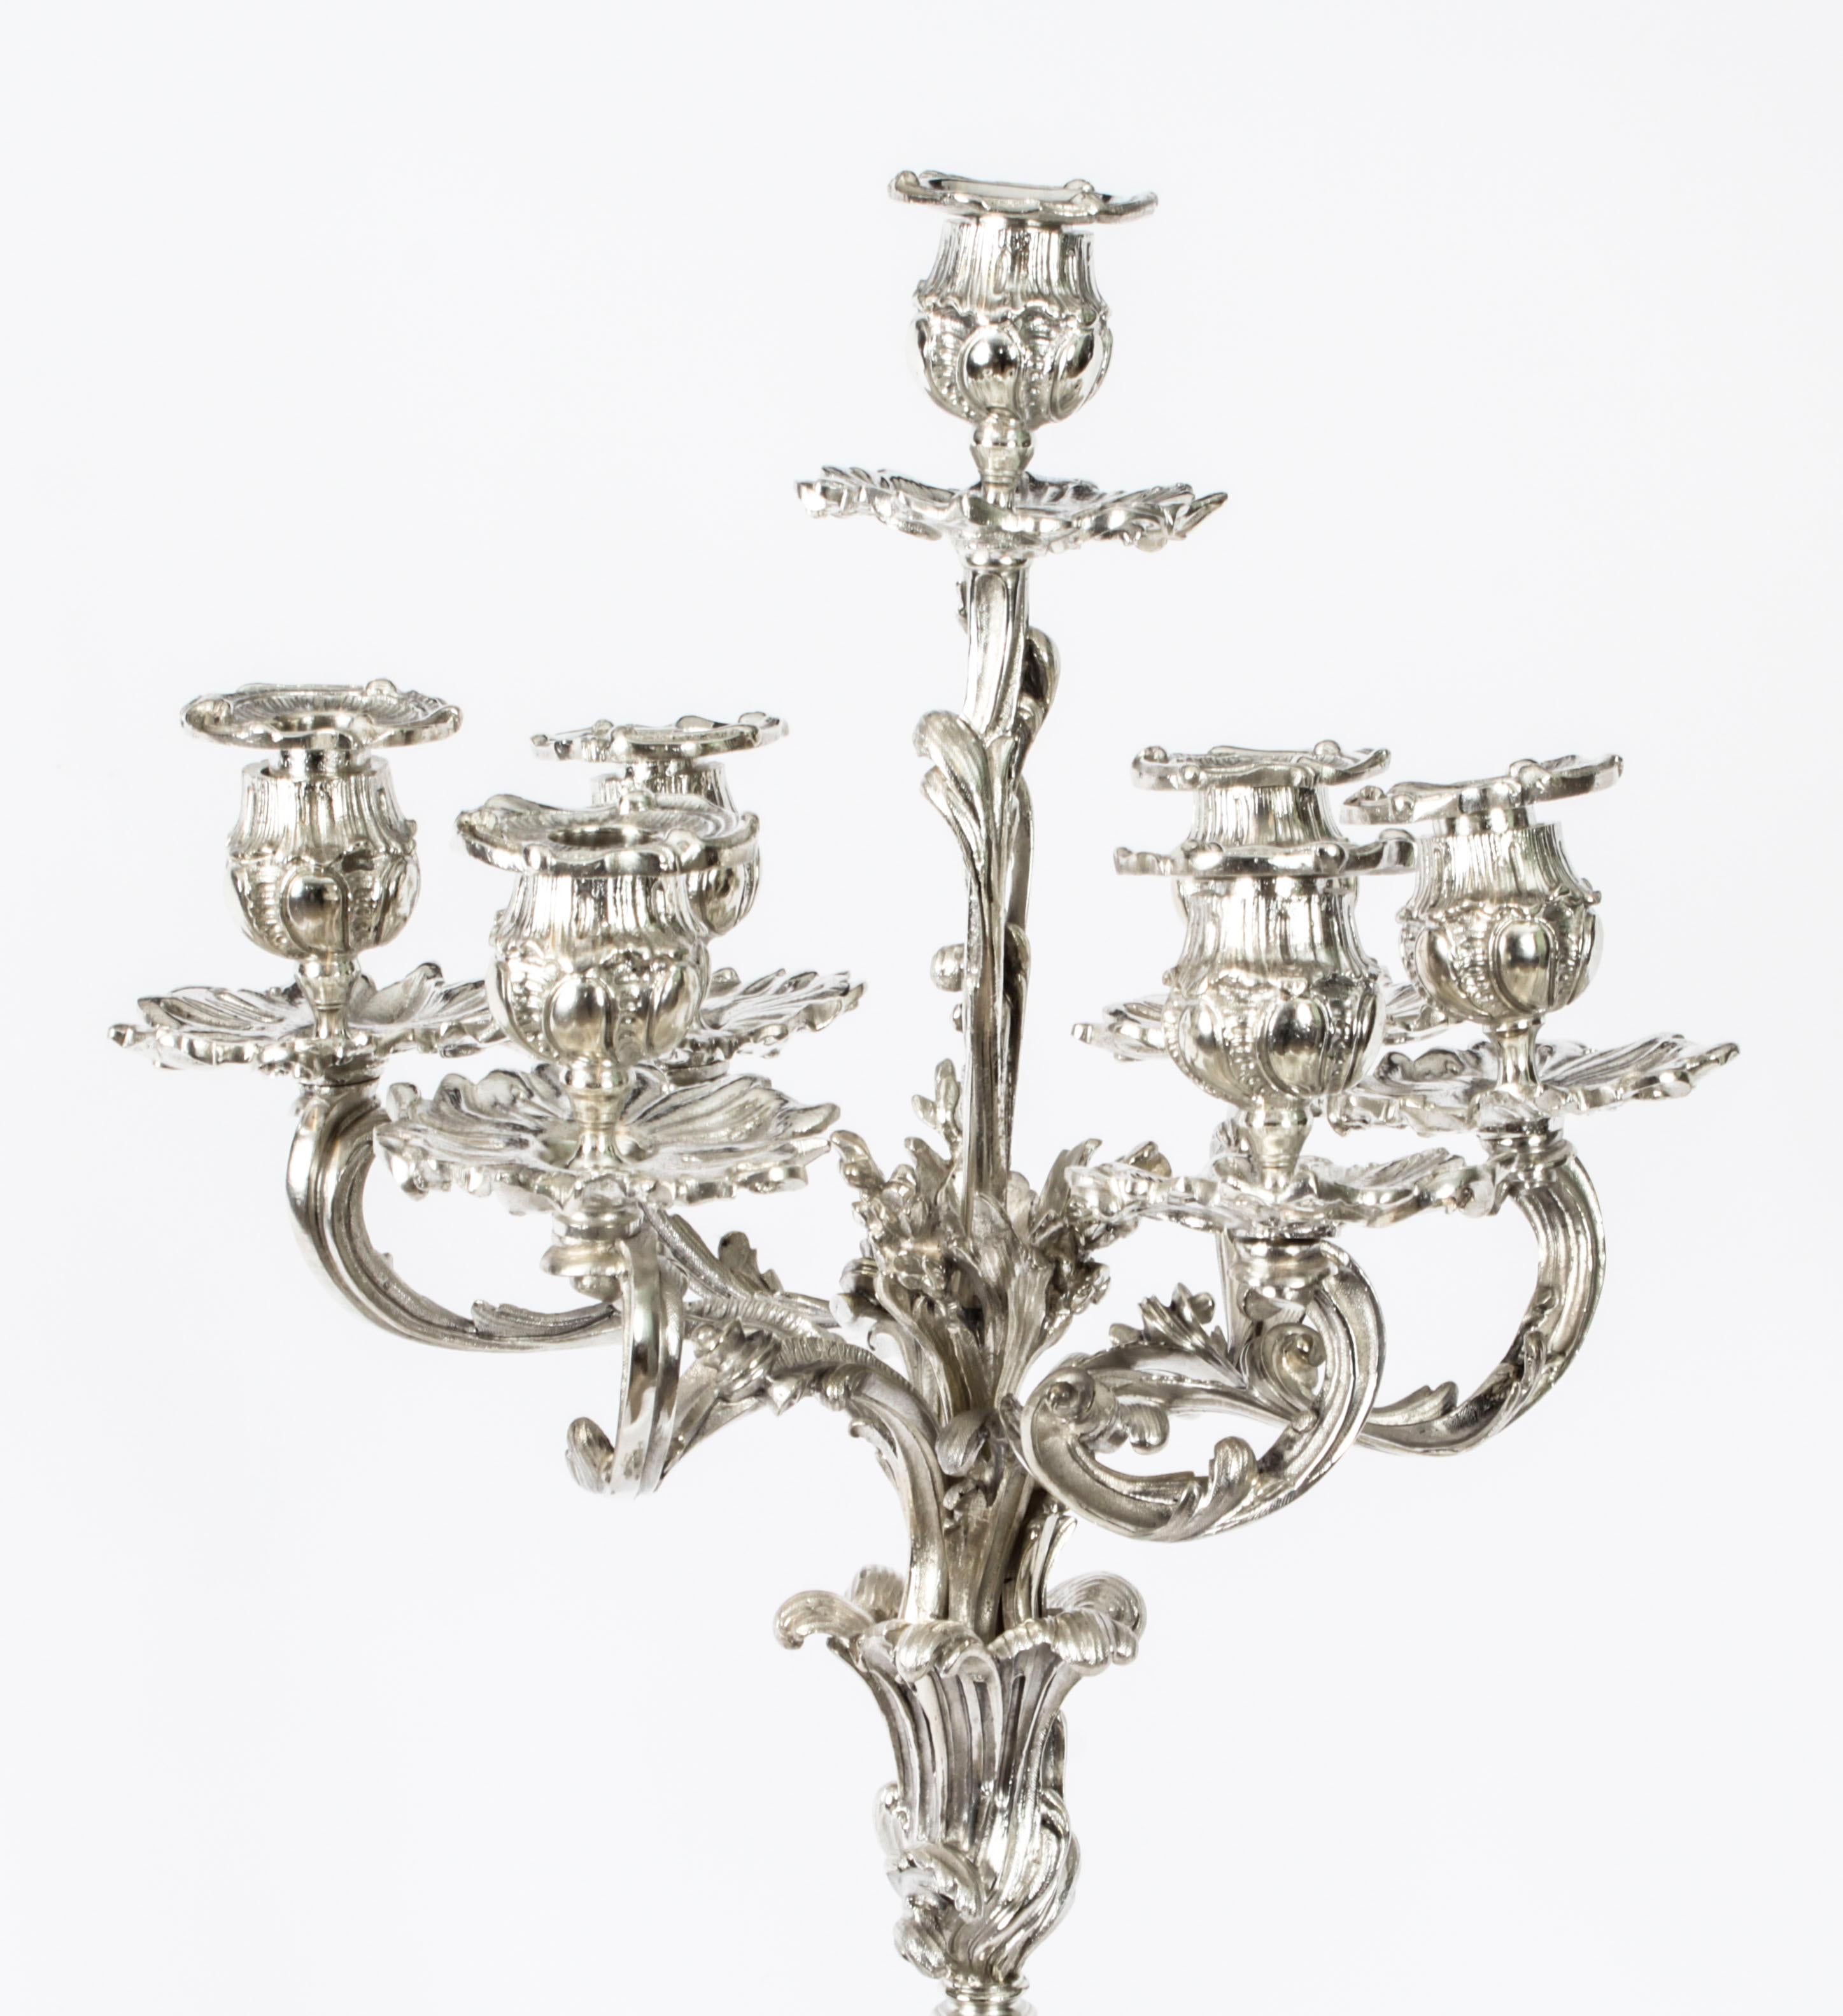 Antique Pair French Rococo Revival 7 Light Silver Plated Candelabra 1920s 10